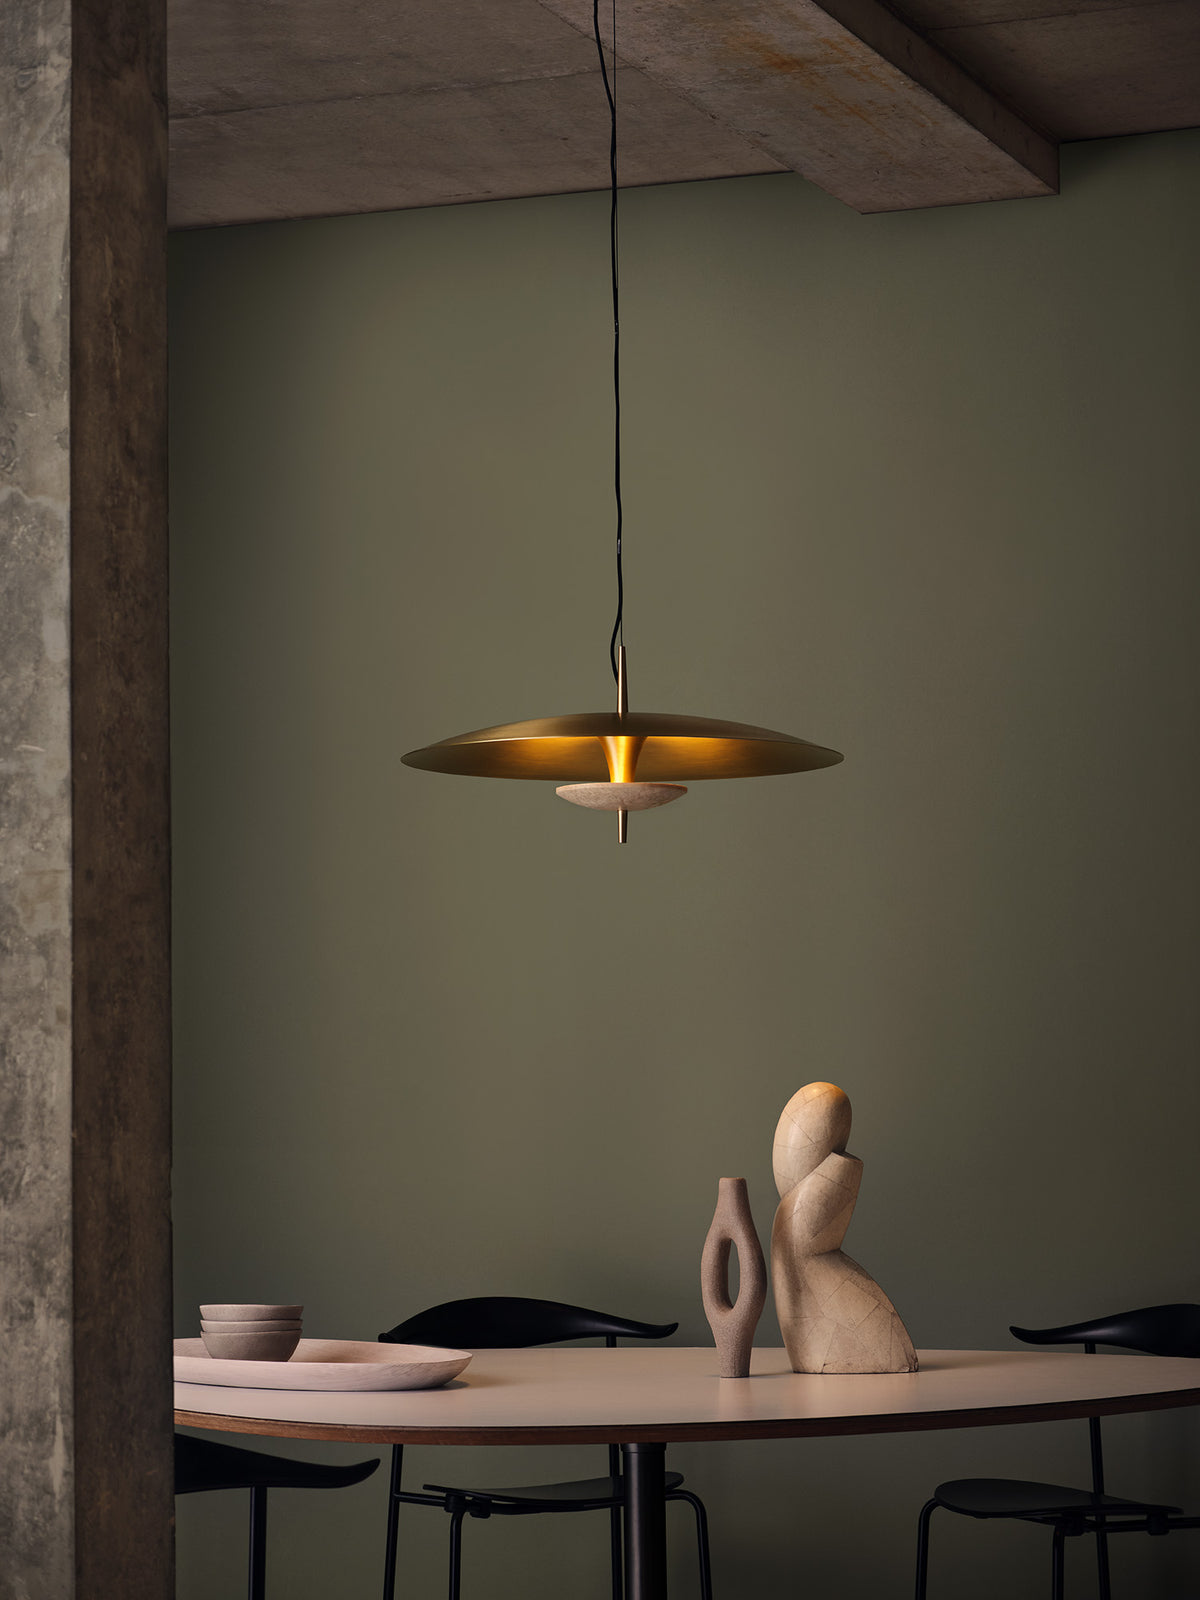 Small Luna Pendant Light in antique brass with travertine disc suspended above modern dining table